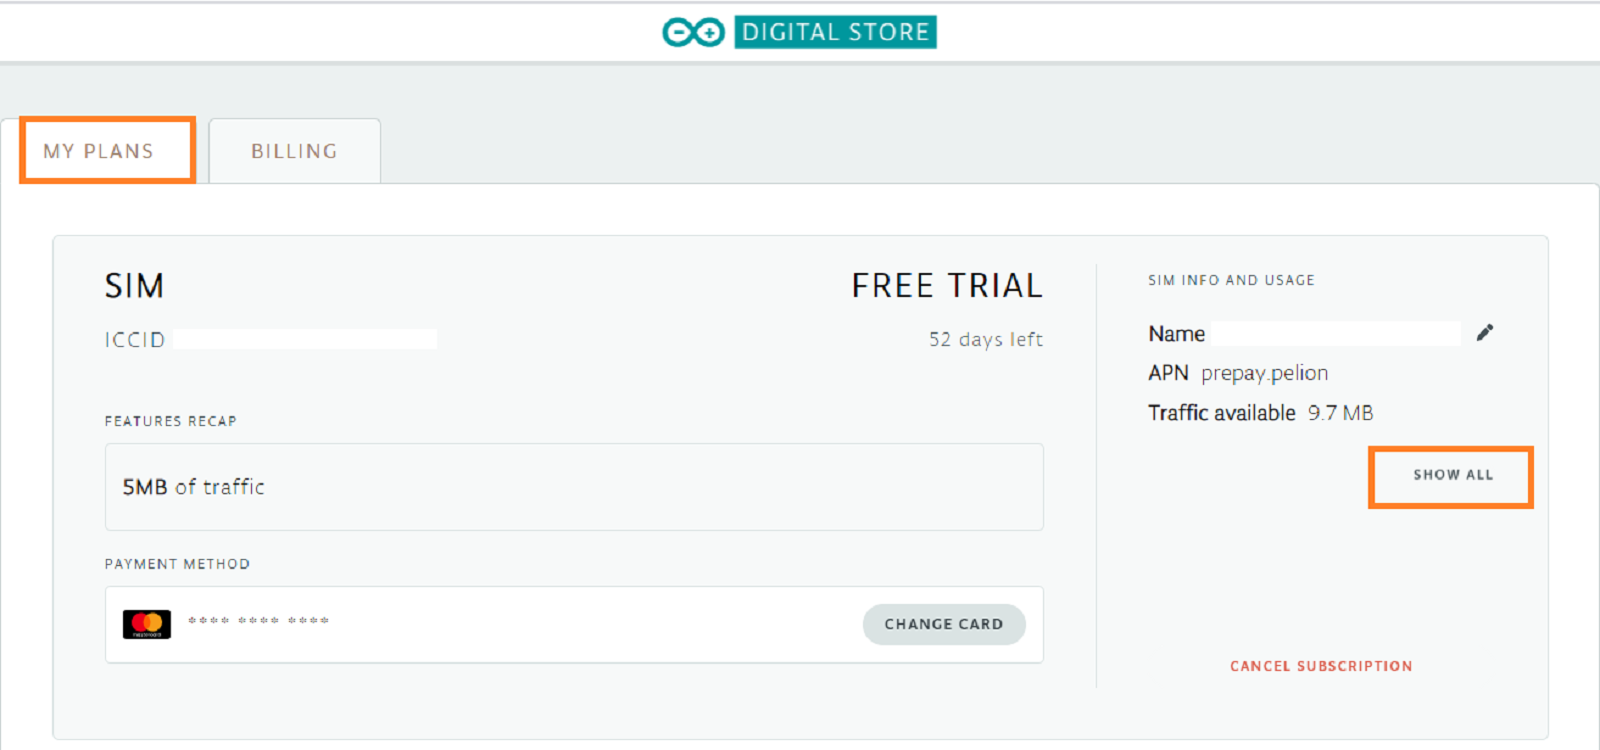 "My Plans" and "Show all" highlighted in Arduino Digital Store